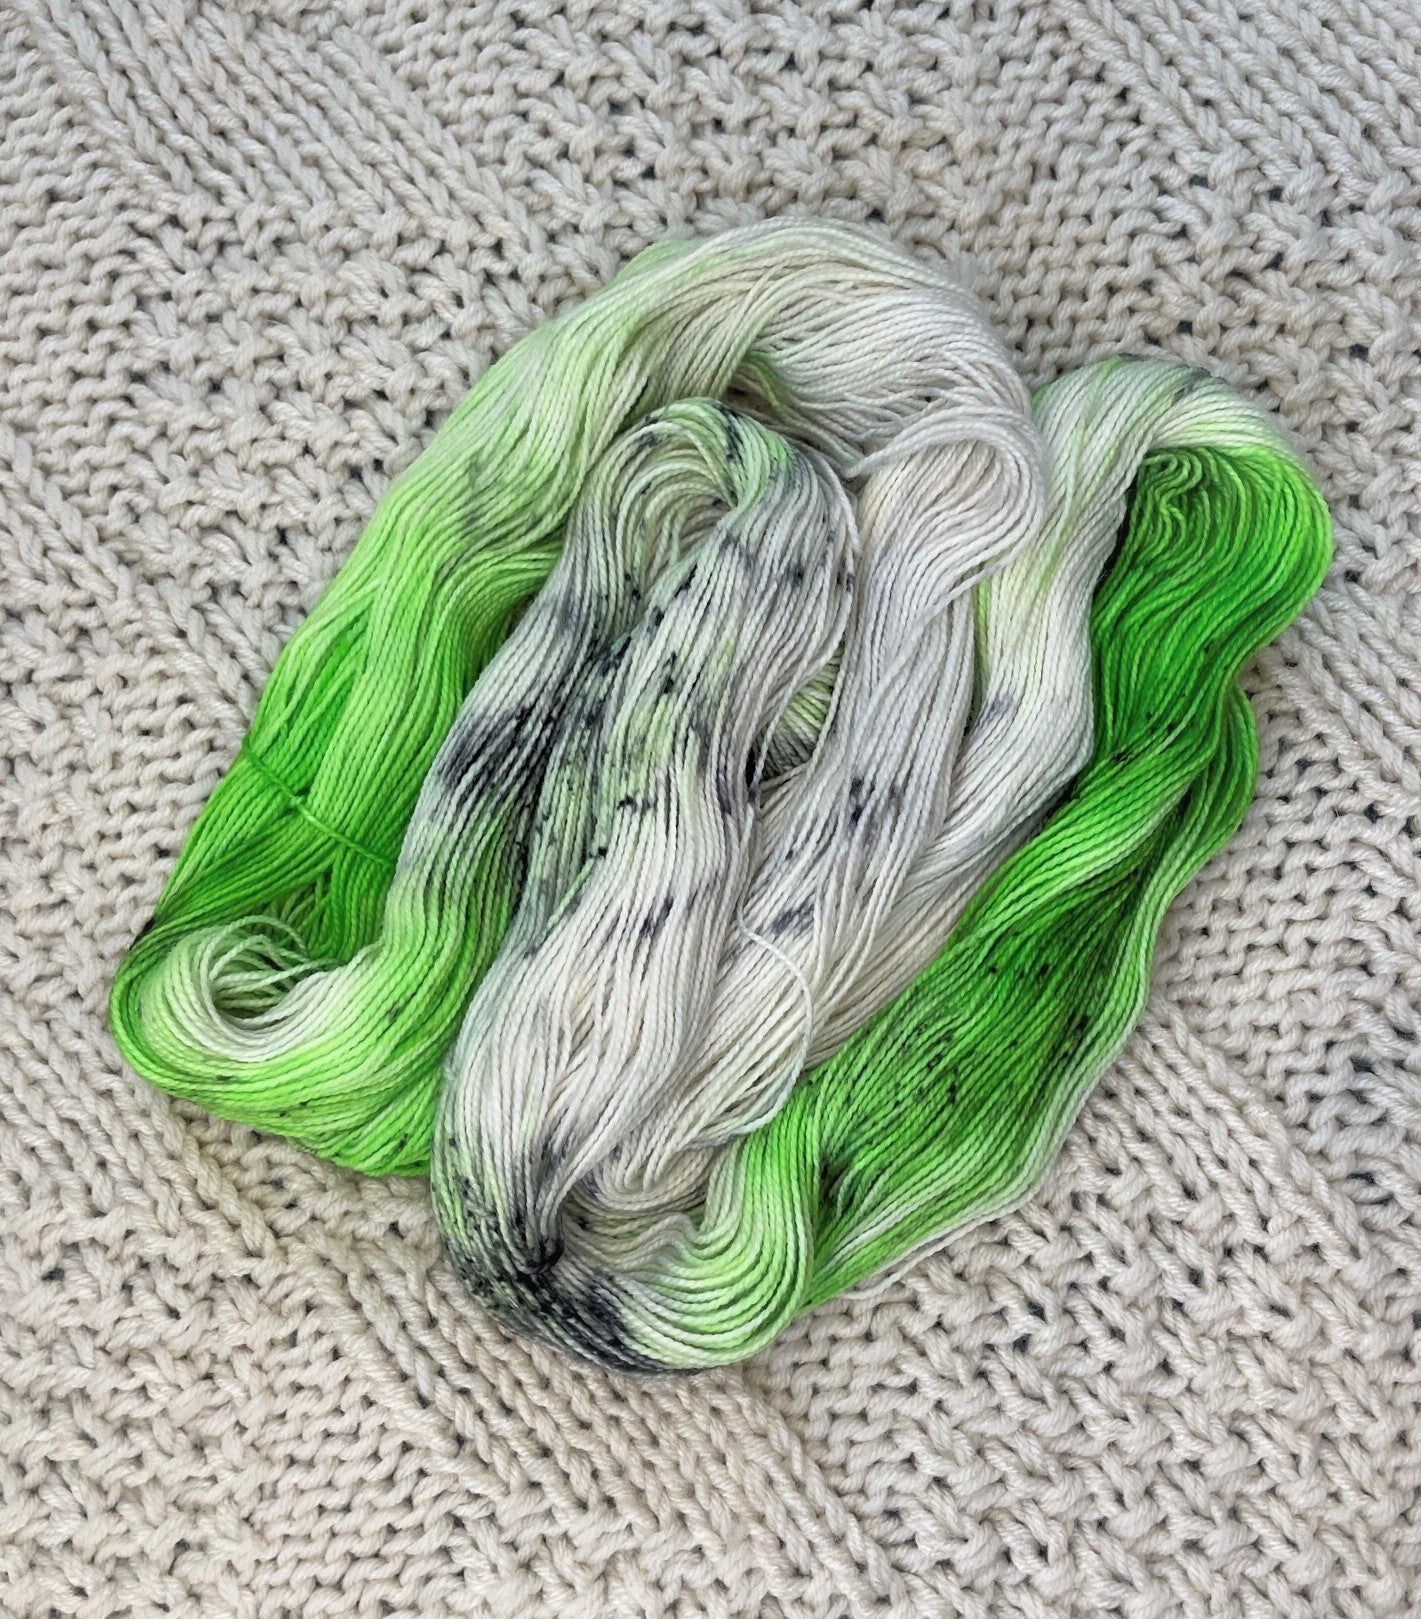 Super Clap - Hand Dyed 2-Ply SW Sock Fingering Weight 80/20 Merino Nylon Yarn, 400 Yards (365 Meters)